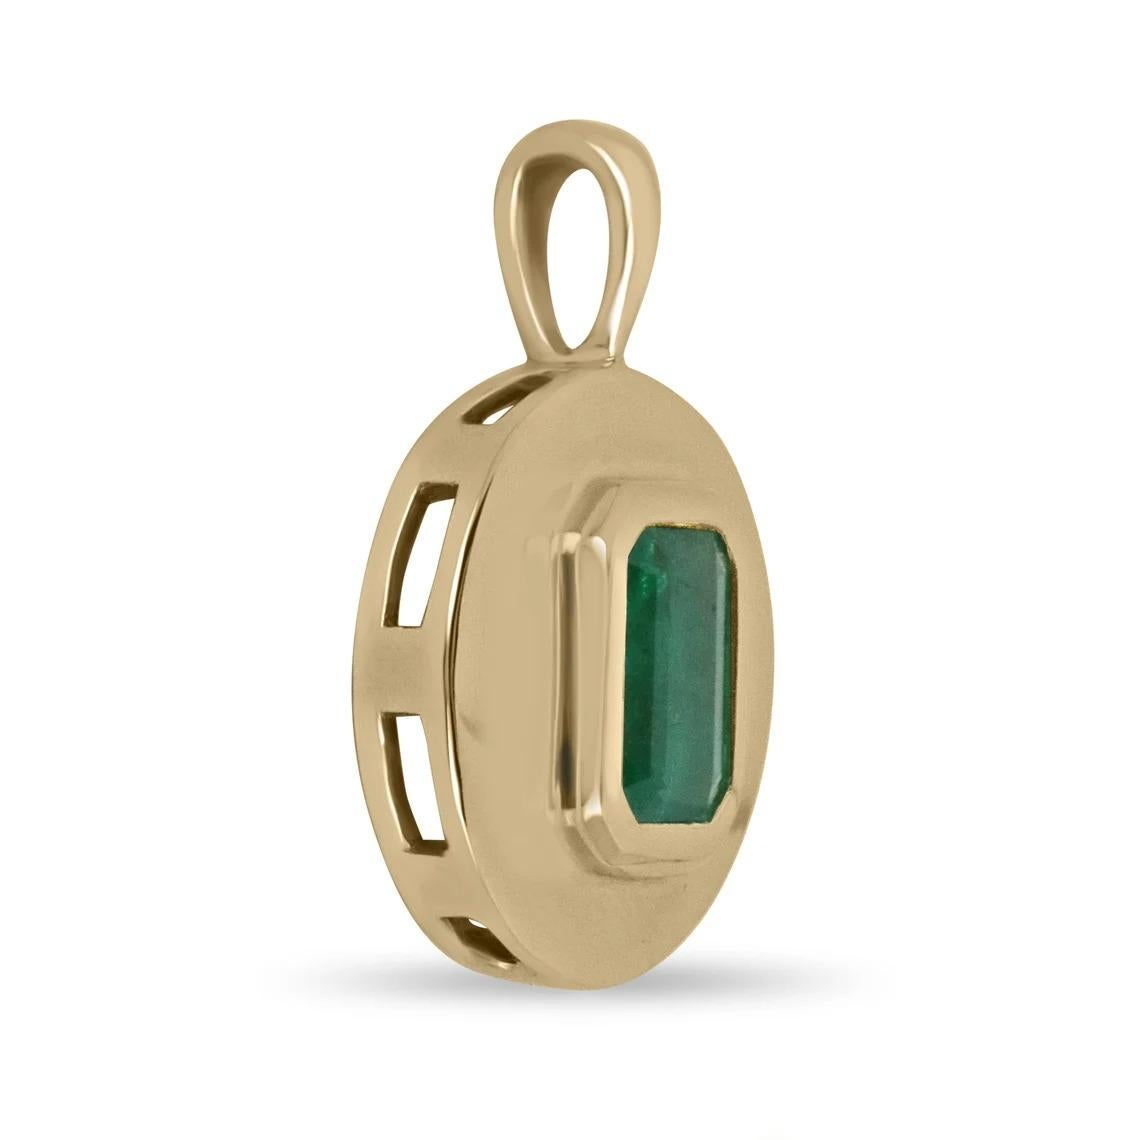 A stunning emerald signet hand-made pendant in solid 14K gleaming gold. This emerald cut-shaped emerald displays a beautiful rare medium rich green color and very good luster. The emerald is bezel set in a custom-made golden frame. A 14K cable chain